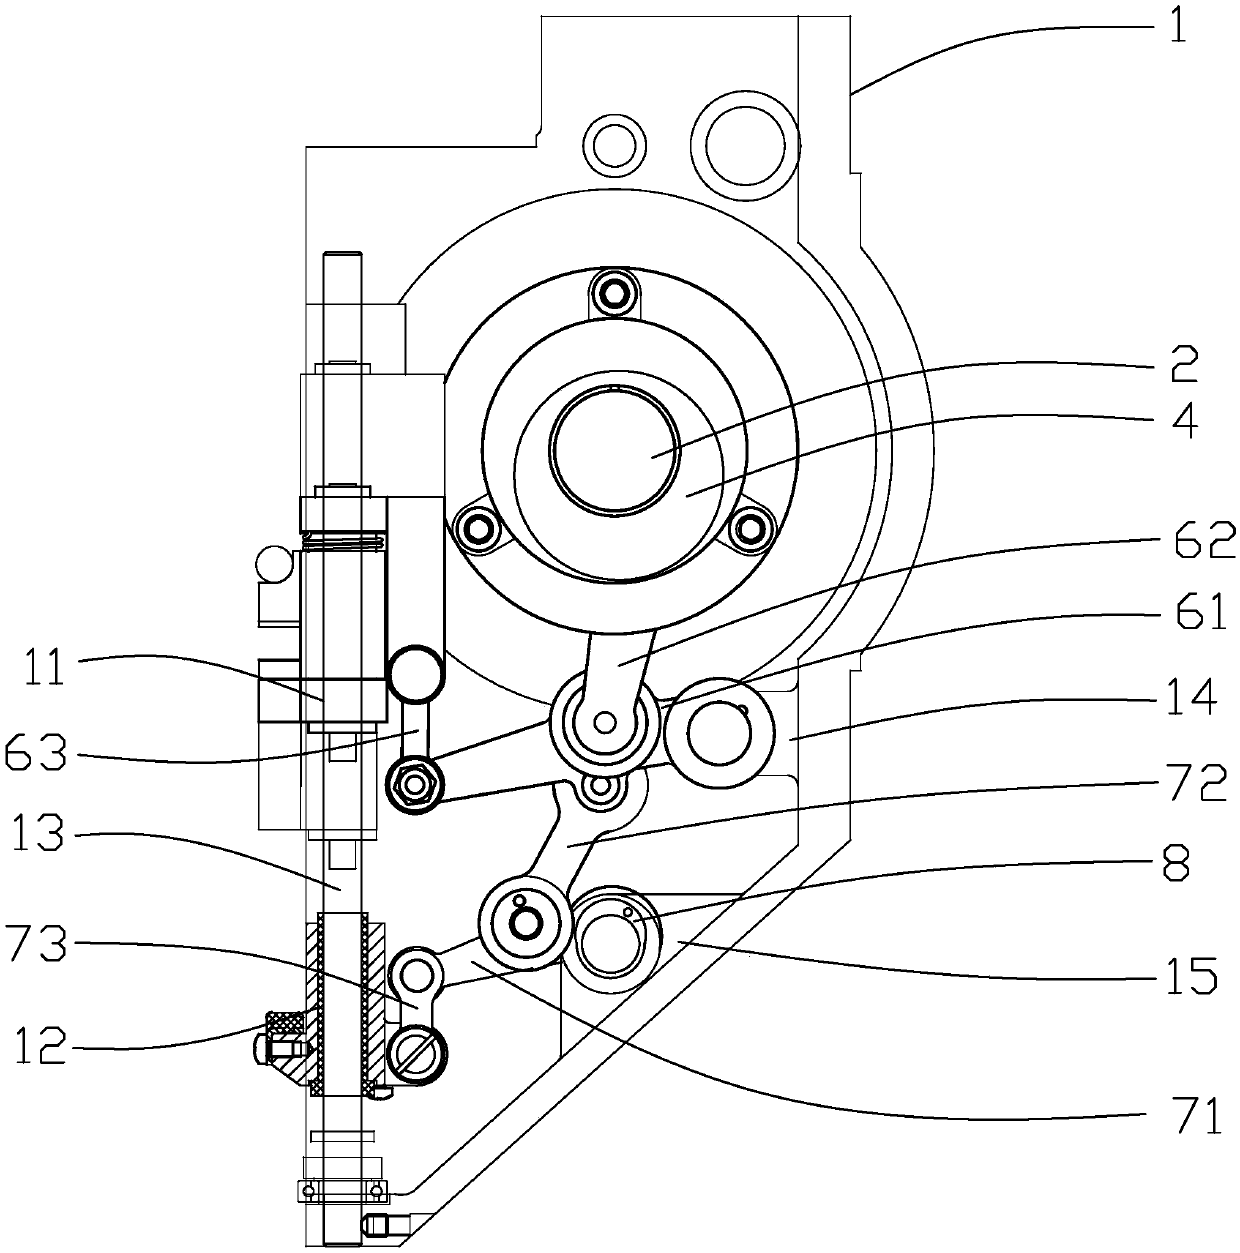 Needle rod-pressure pin driving device applied to computer embroidering machine